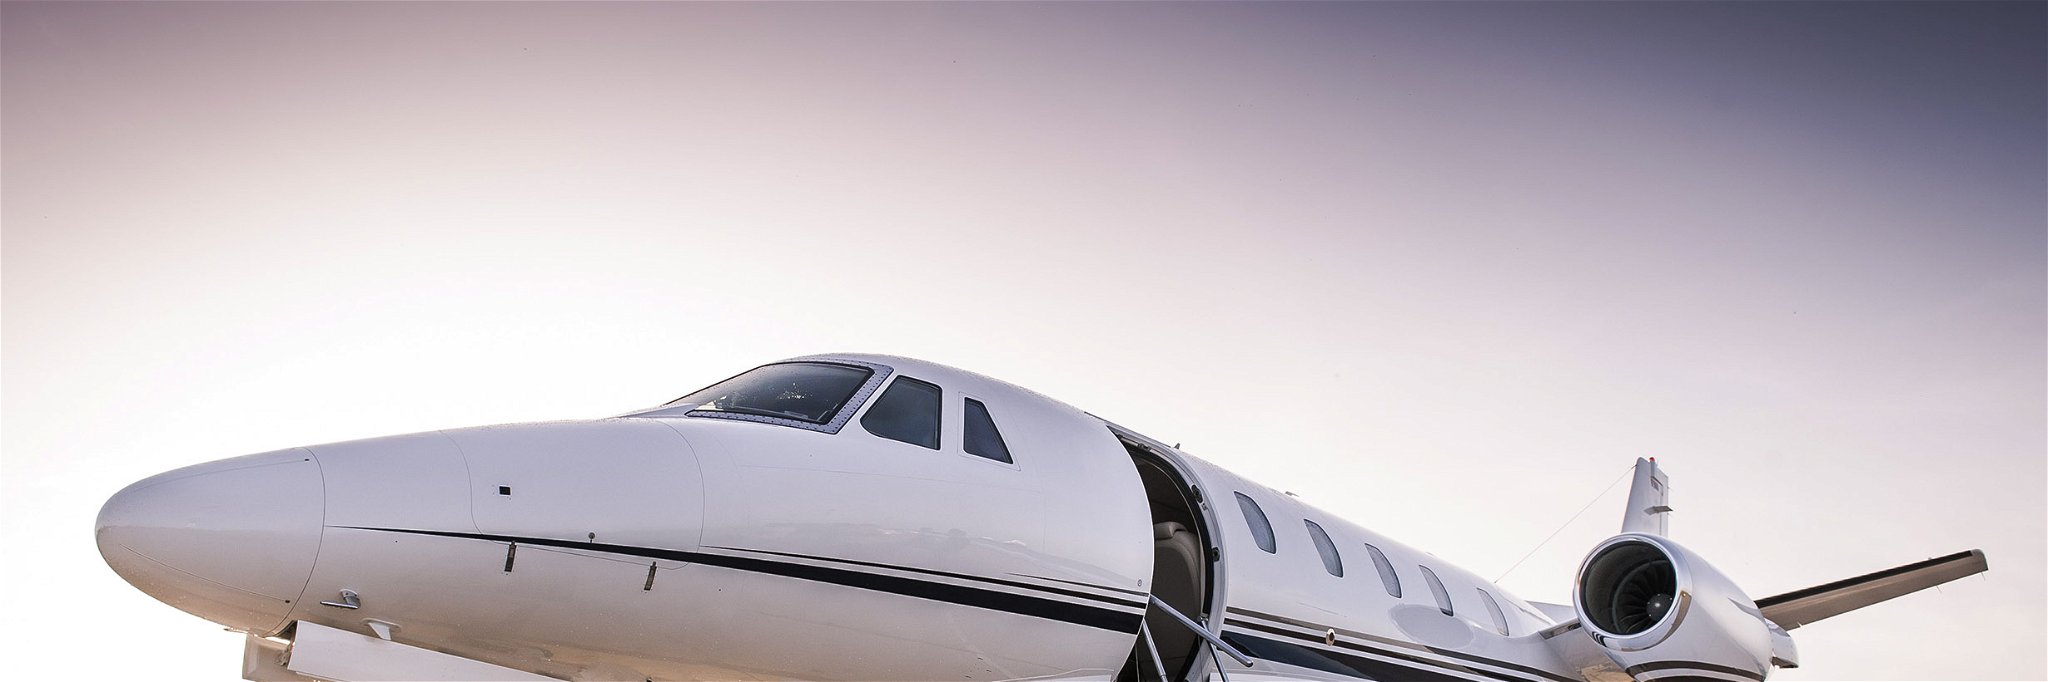 Flights in private jets have been criticised.